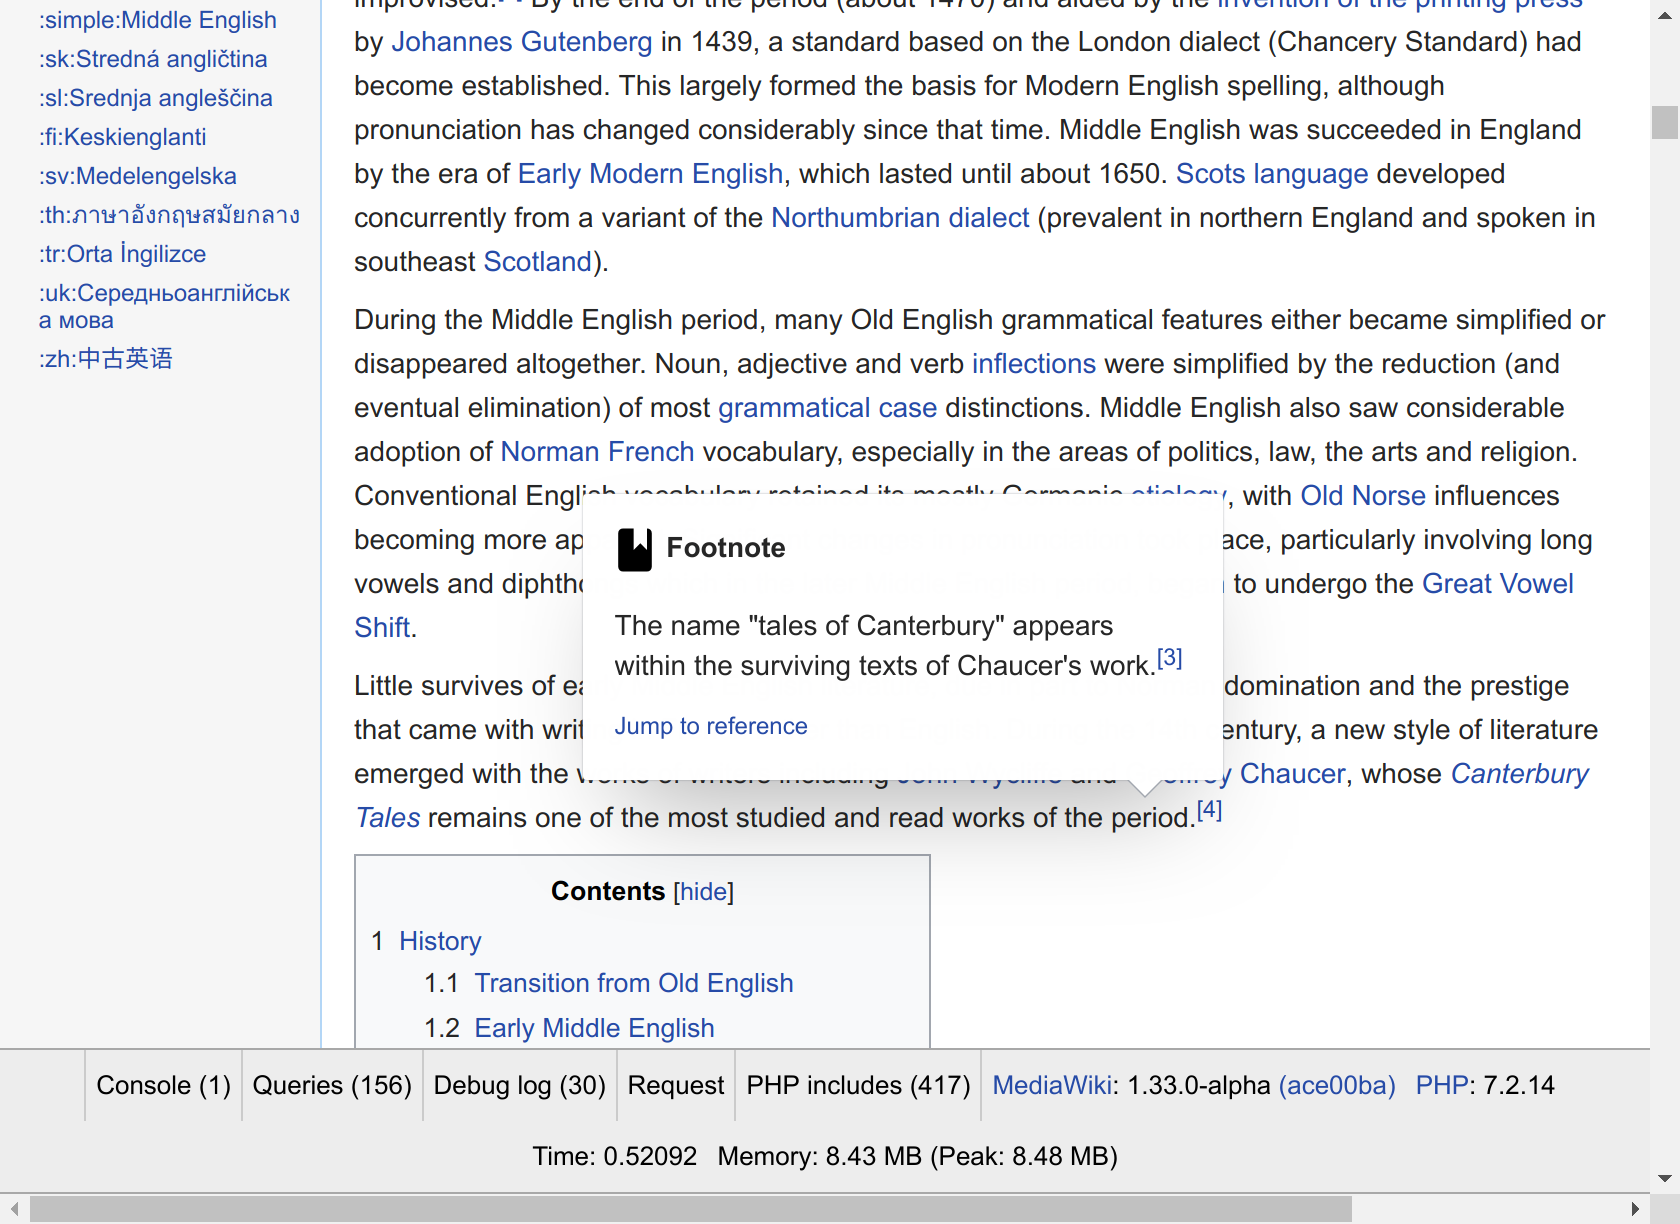 localhost_8181_wiki_Middle_English.png (1×1 px, 496 KB)